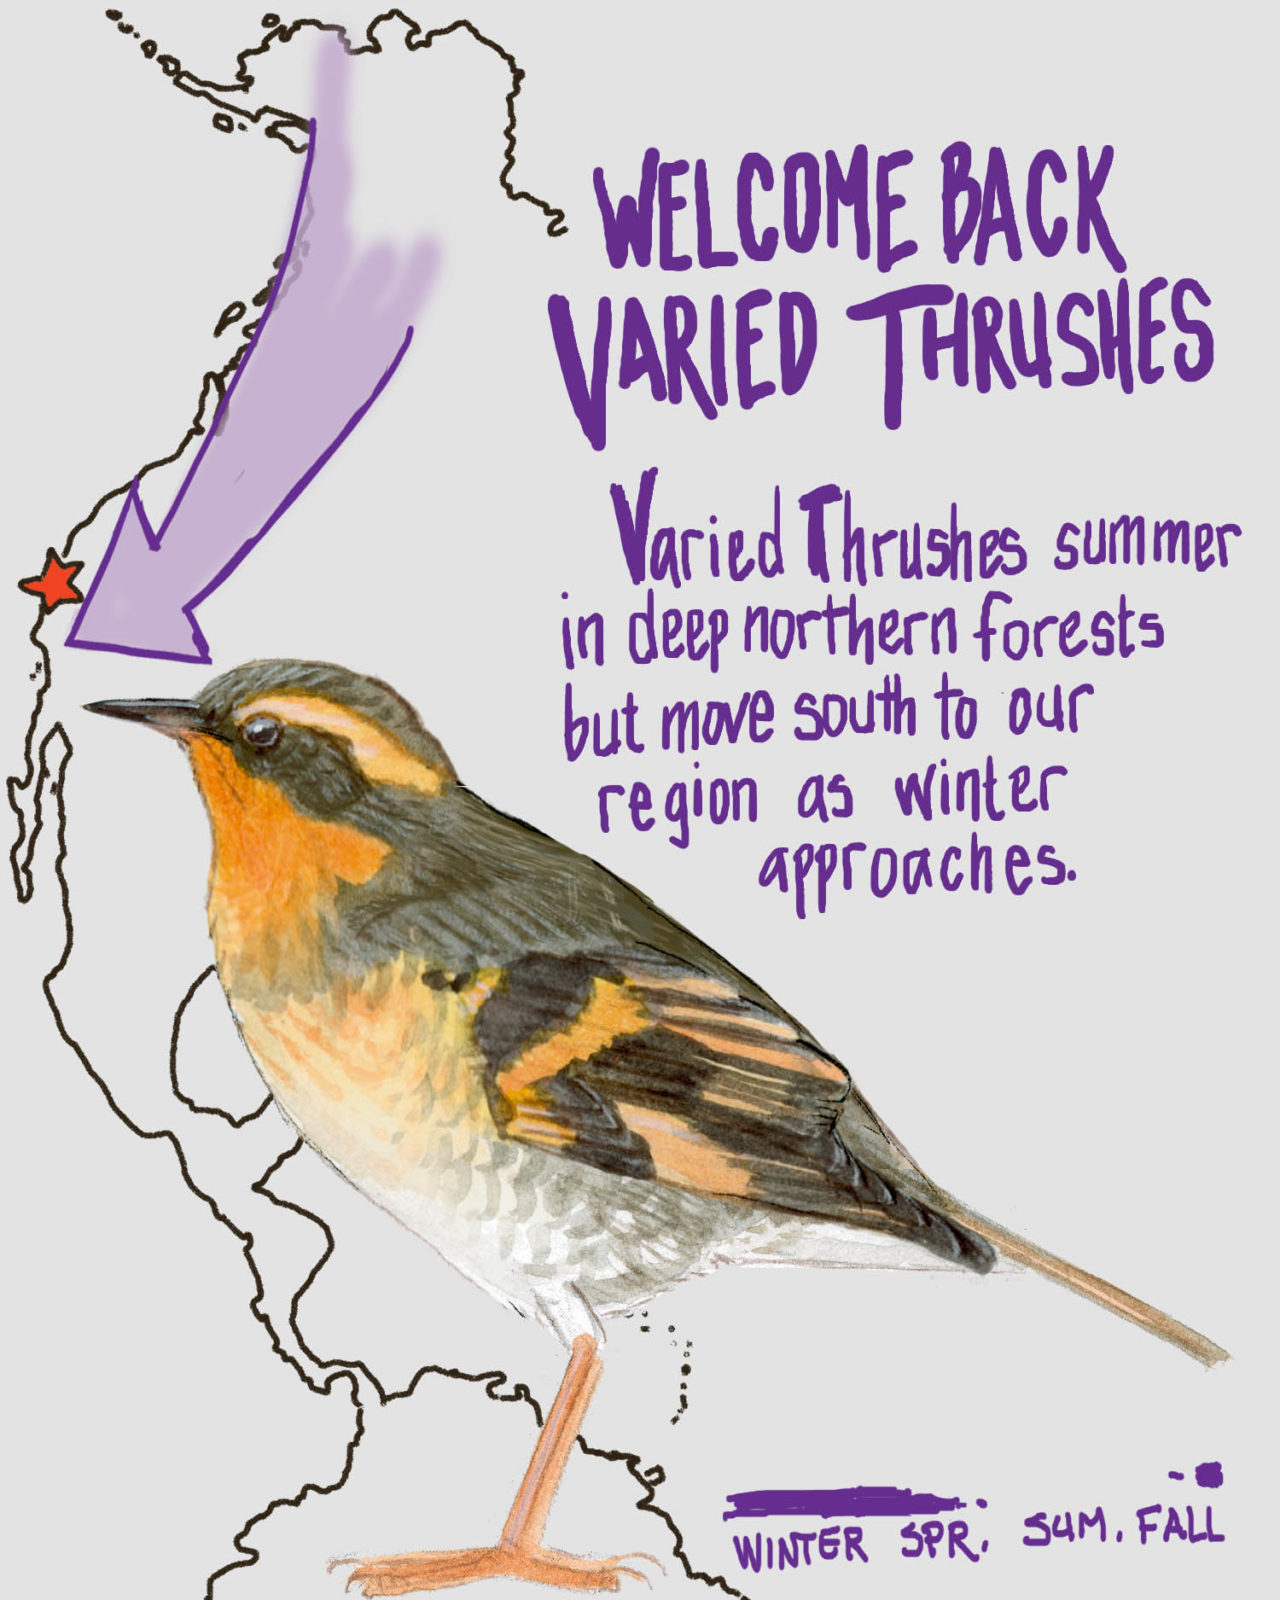 In the winter, we welcome back varied thrushes, which were summering in deep northern forests.